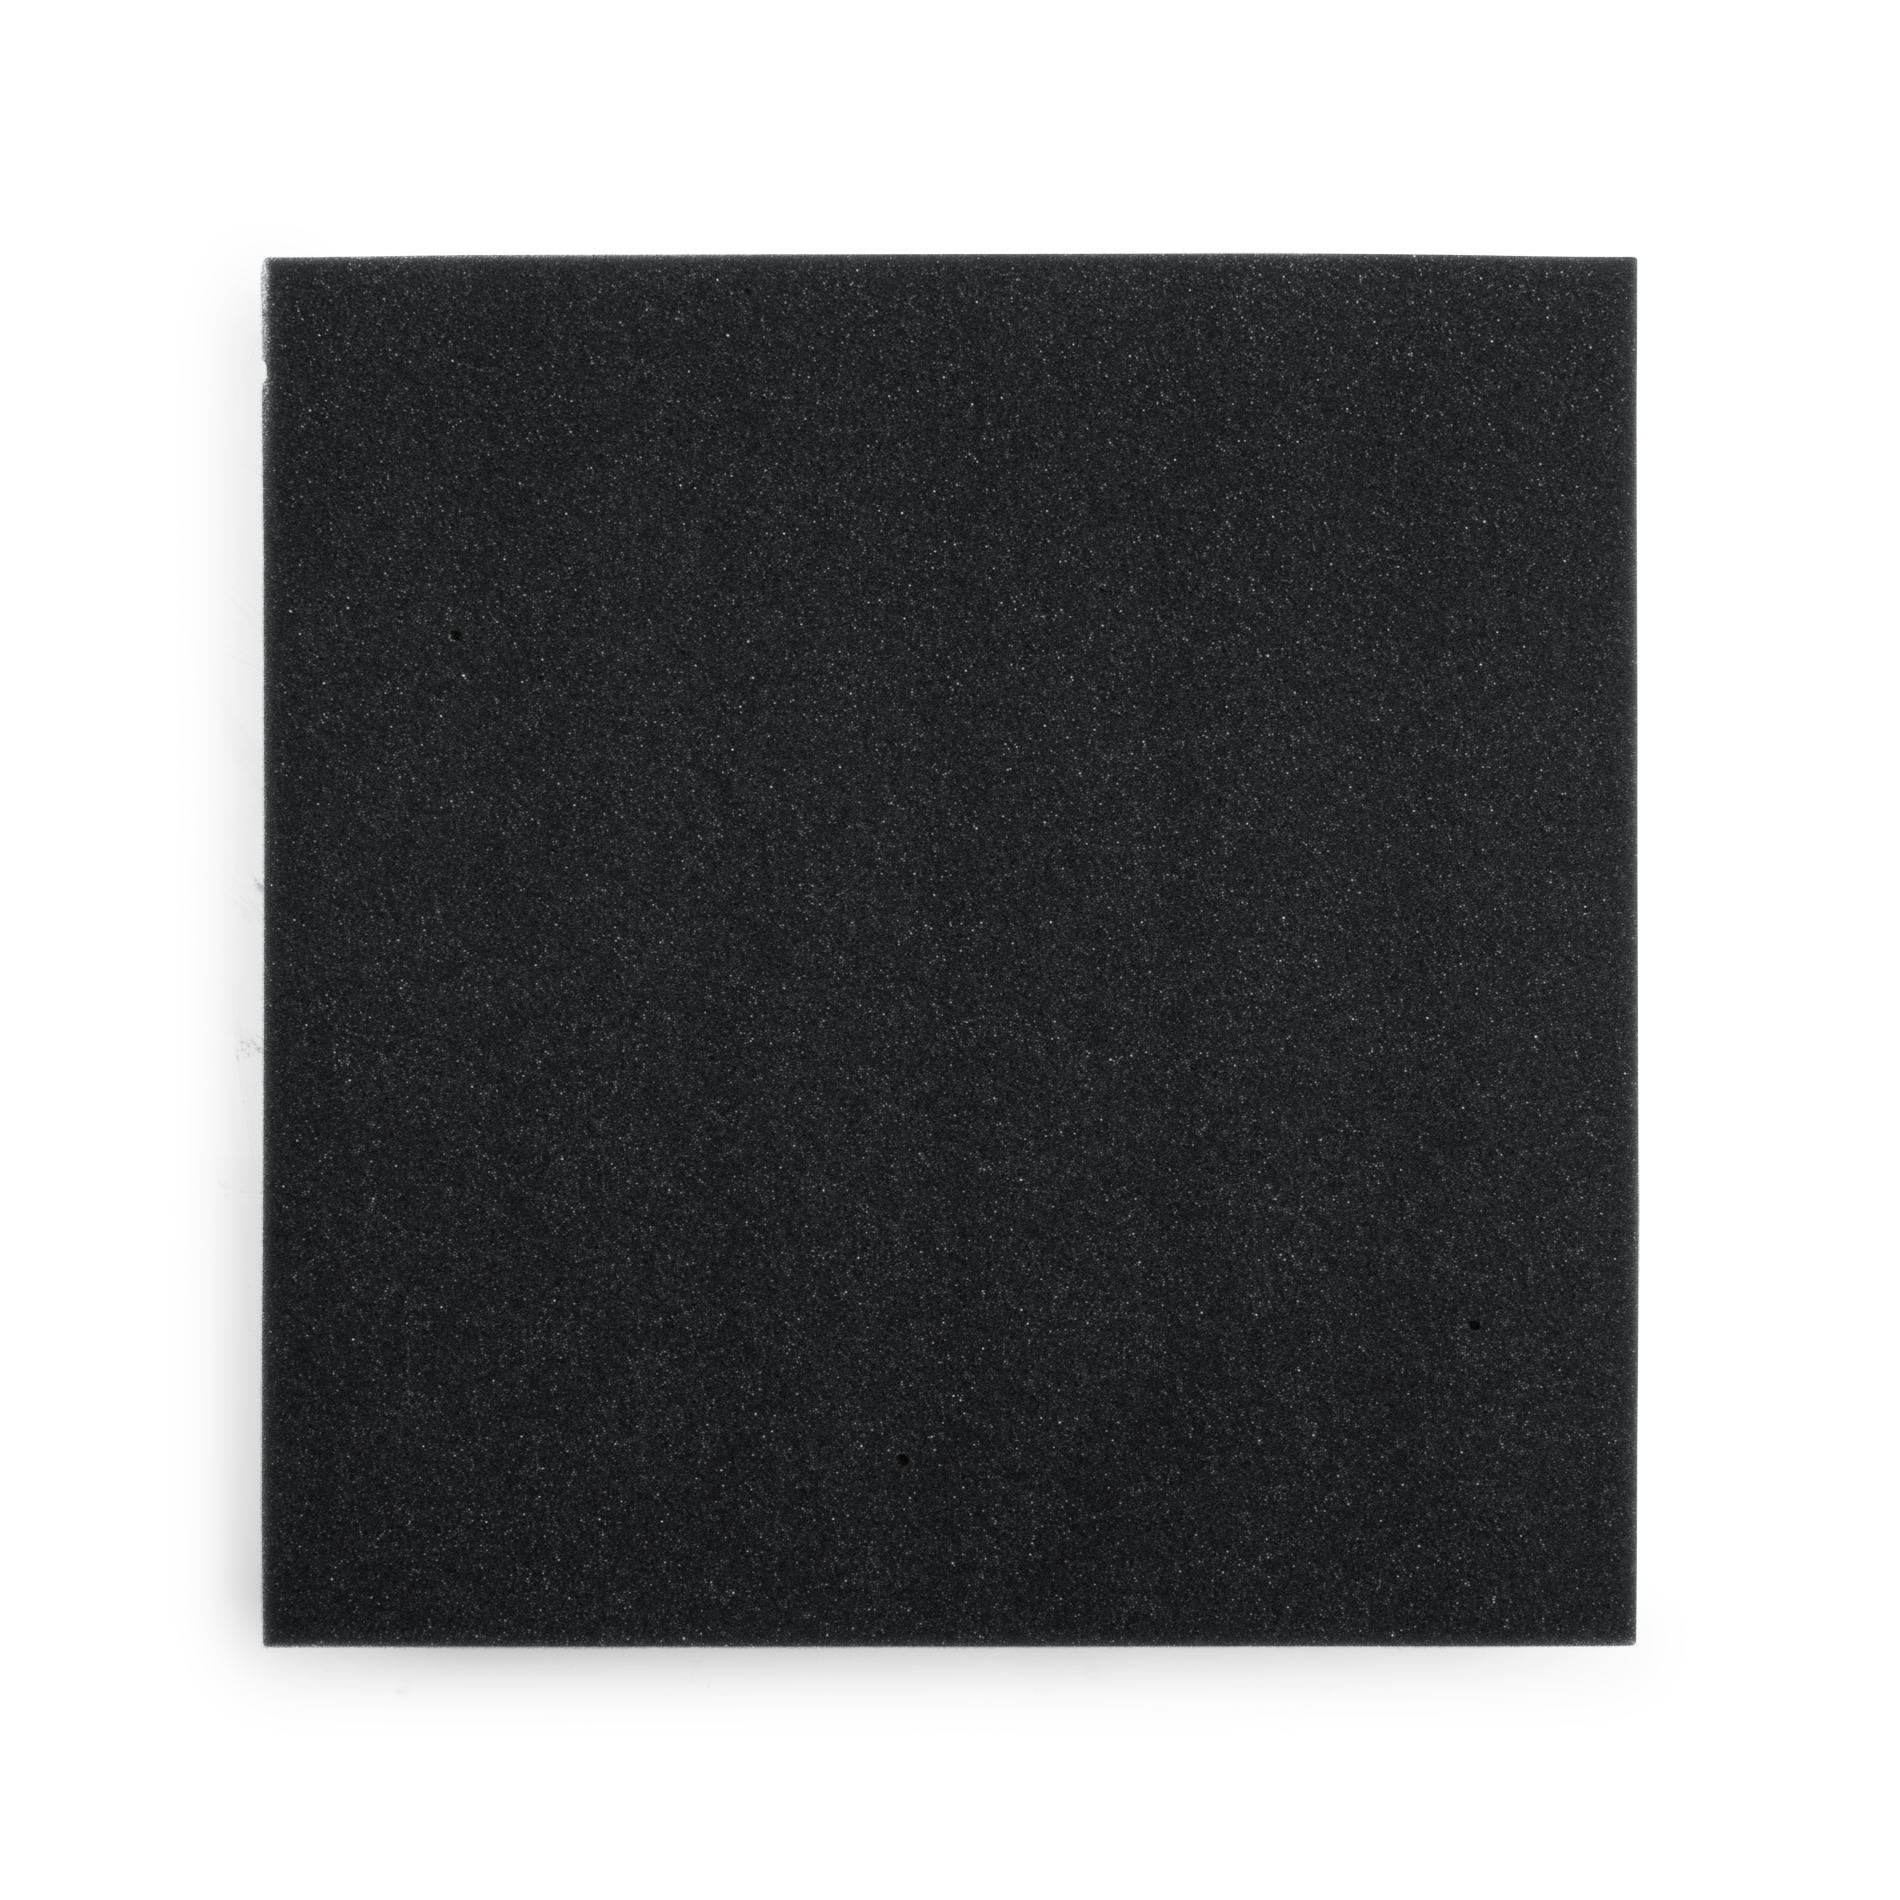 8 Pack of Charcoal 12×12″ Acoustic Pyramid Panel-GFW-ACPNL1212PCHA-8PK